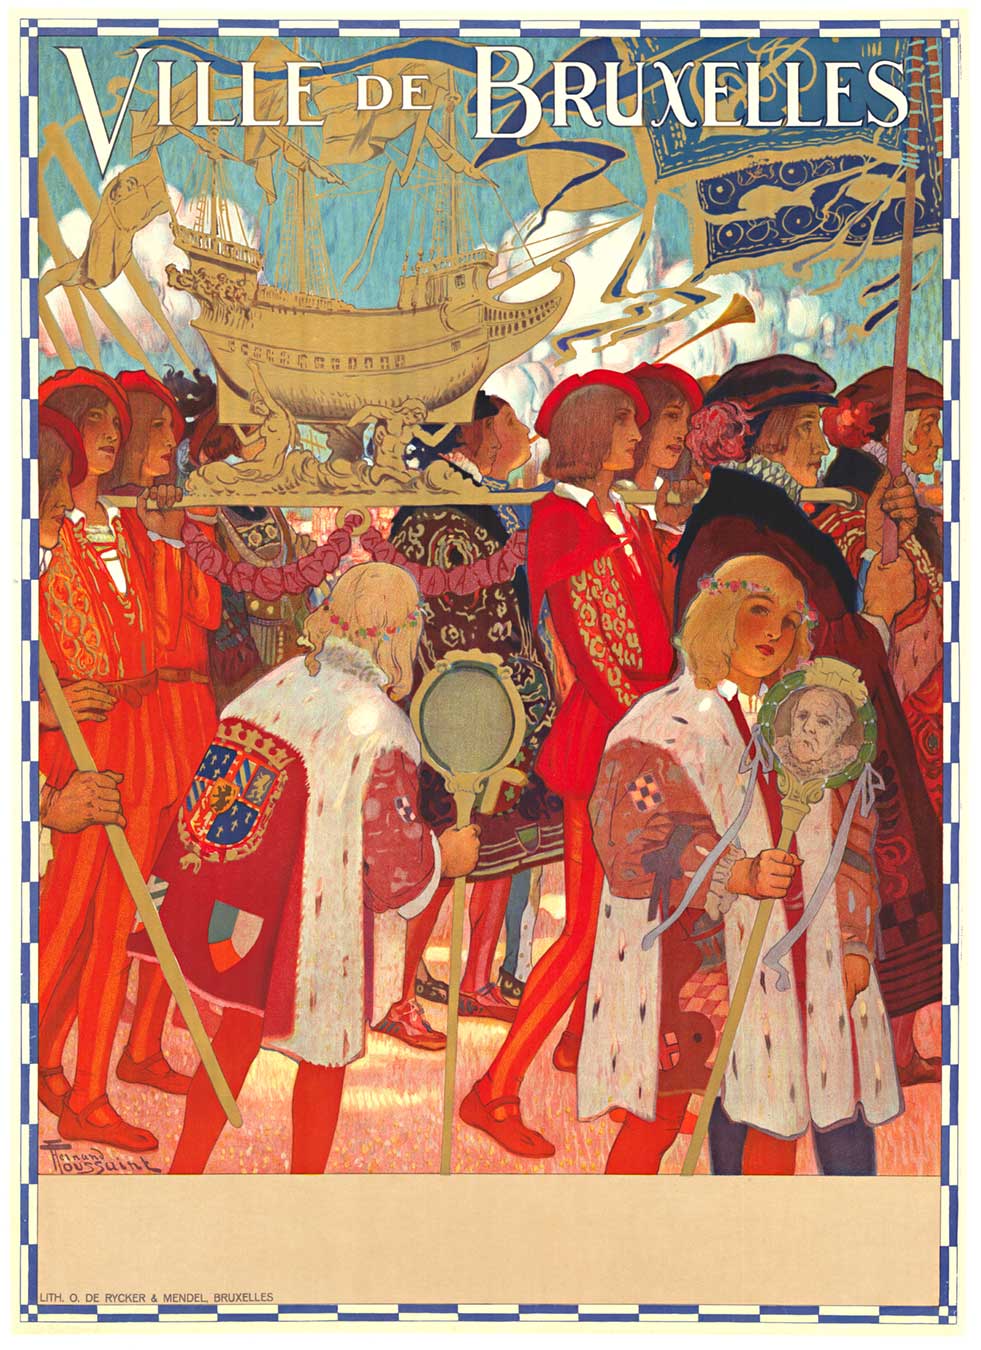  <br>An Art Nouveau poster Ville de Bruxelles, City of Brussel, by Fernand Toussaint, Belgian, 1873 to 1963. Color lithograph on paper. It was signed in the print on the lower left. This poster was realized for the inauguration of the harbor installations